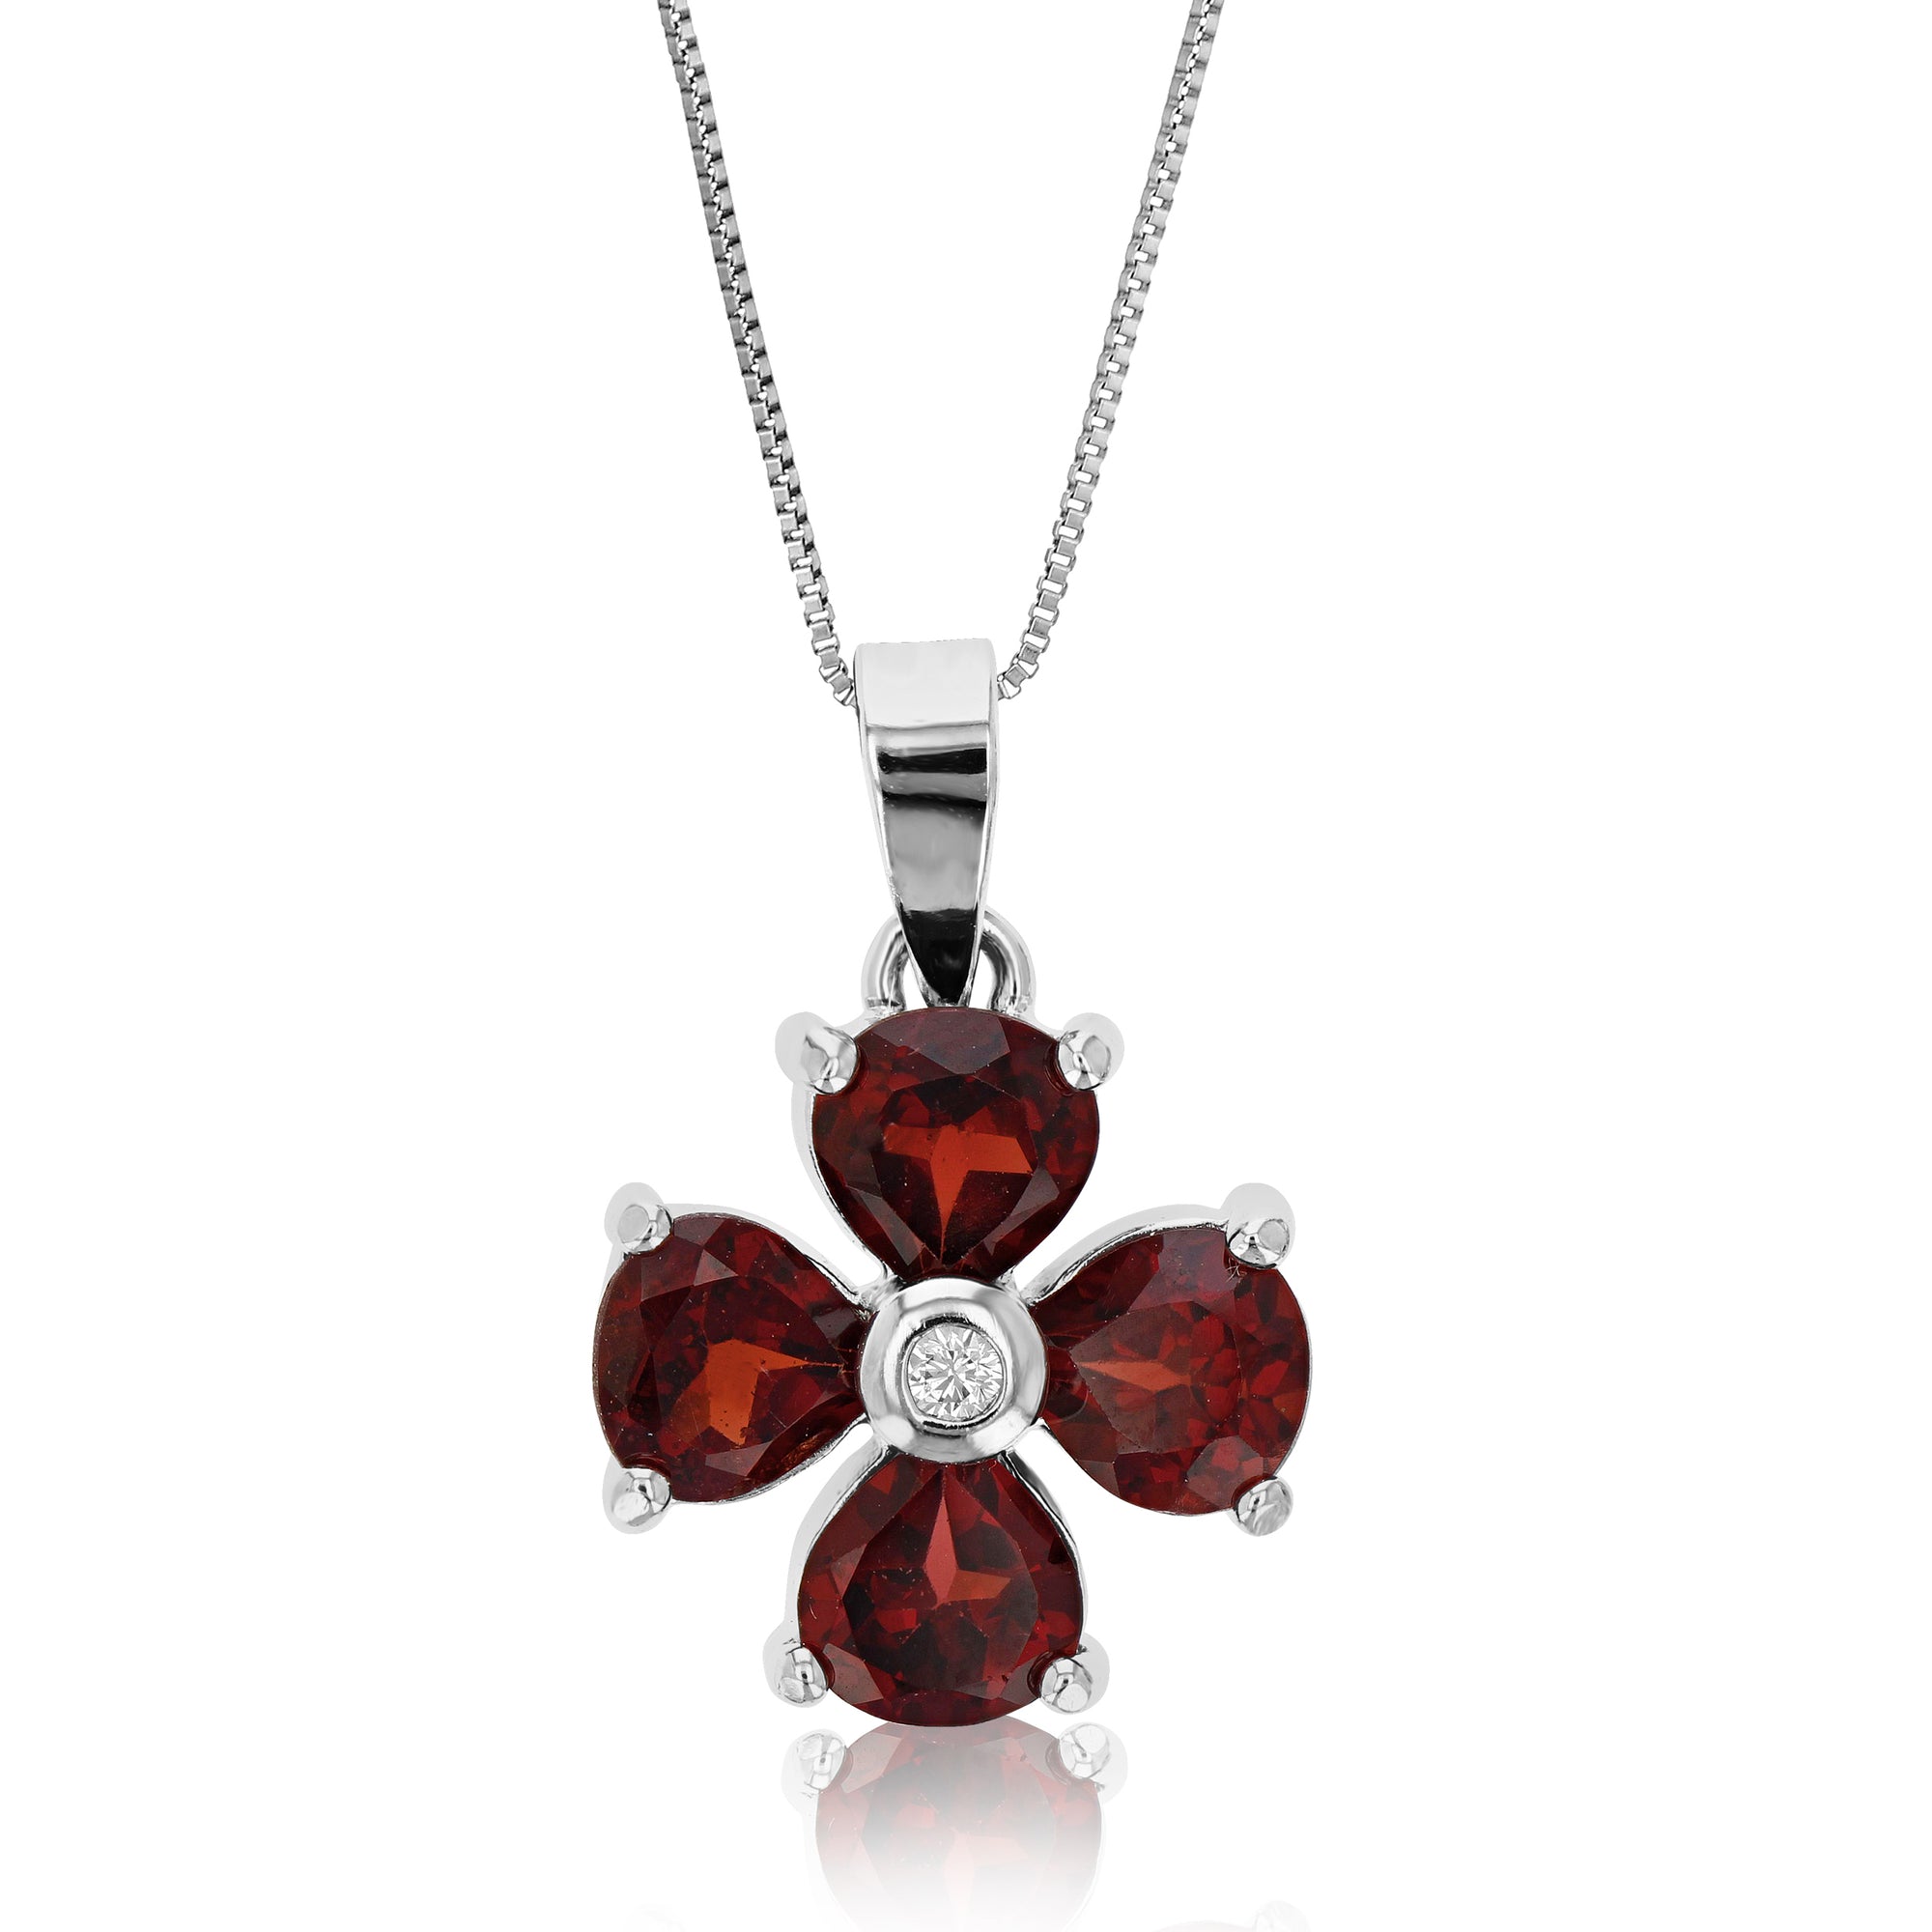 1.40 cttw Pendant Necklace, Garnet Pendant Necklace for Women in .925 Sterling Silver with Rhodium, 18 Inch Chain, Prong Setting